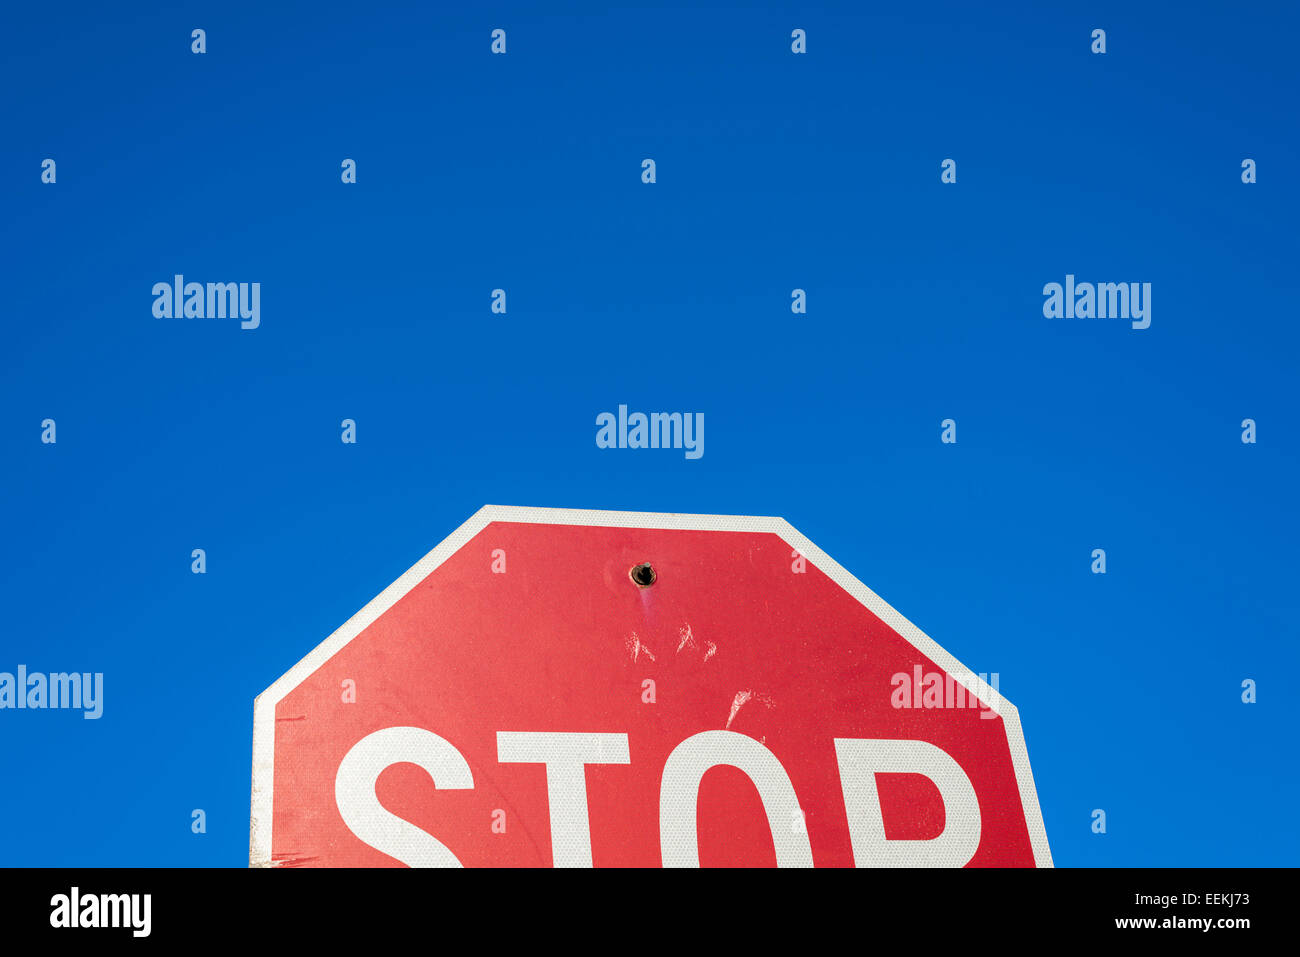 Conceptual image showing a half of a stop sign. Stock Photo